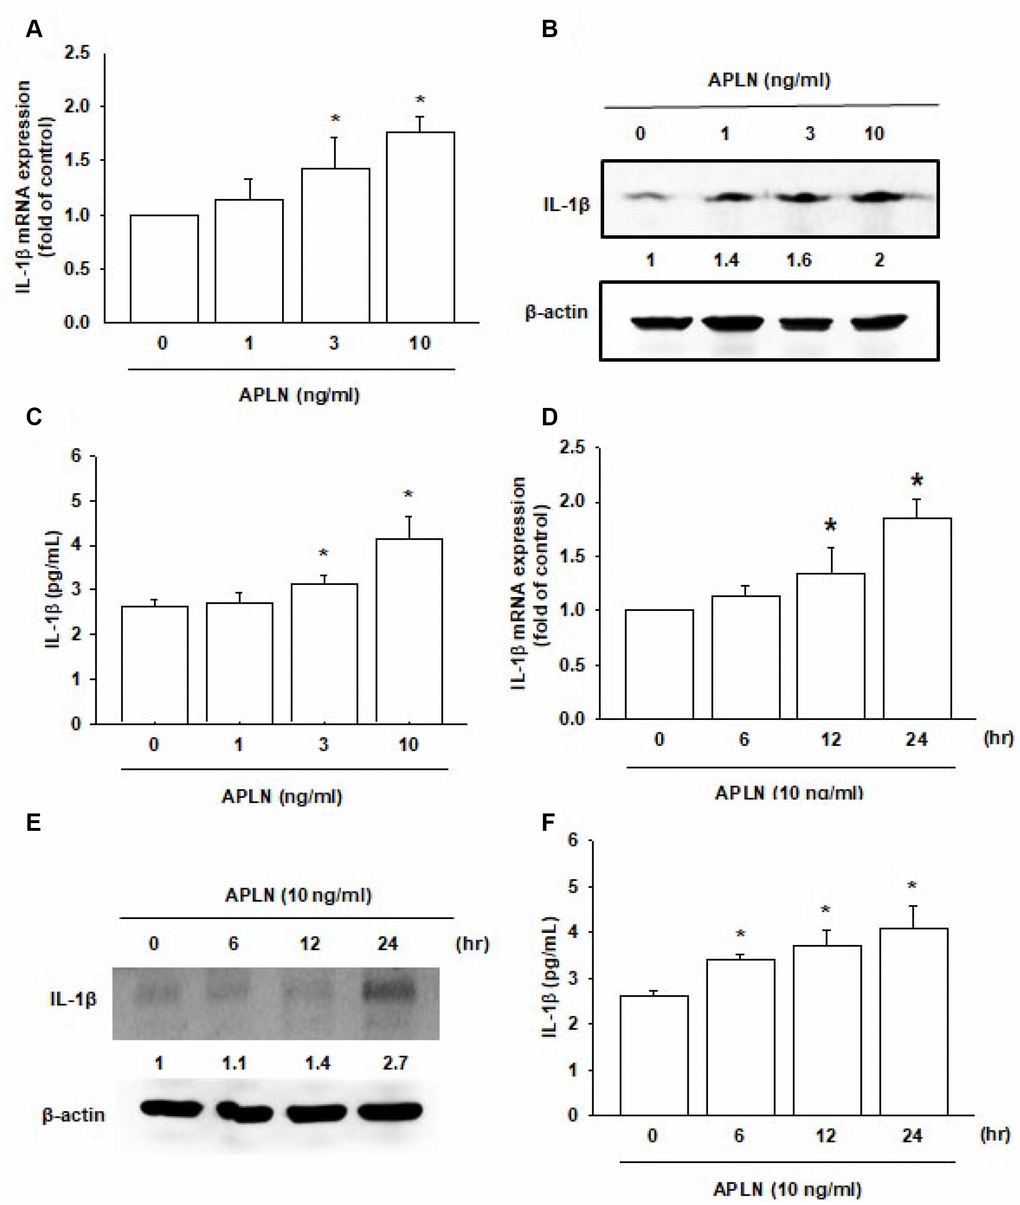 APLN stimulates IL-1β expression in OASFs in concentration- and time-dependent manners. (A) Human OASFs were incubated with 0, 1, 3, and 10 ng/mL of APLN for 24 h, and IL-1β mRNA expression levels were examined by RT-qPCR (n=4). (B) OASFs were incubated under various concentrations of APLN for 24 h, and IL-1β expression levels were examined by Western blot (n=3). (C) OASFs were cultured under various concentrations of APLN for 24 h, and excreted IL-1β were examined by ELISA assay (n=5). (D) OASFs were incubated with 10 ng/mL of APLN for 0, 6, 12, and 24 h. IL-1β mRNA levels were examined by RT-qPCR (n=4). (E) IL-1β protein synthesis levels were examined by Western blot (n=3). (F) Excretion of IL-1β protein levels in human OASFs was examined by ELISA (n=5). * p